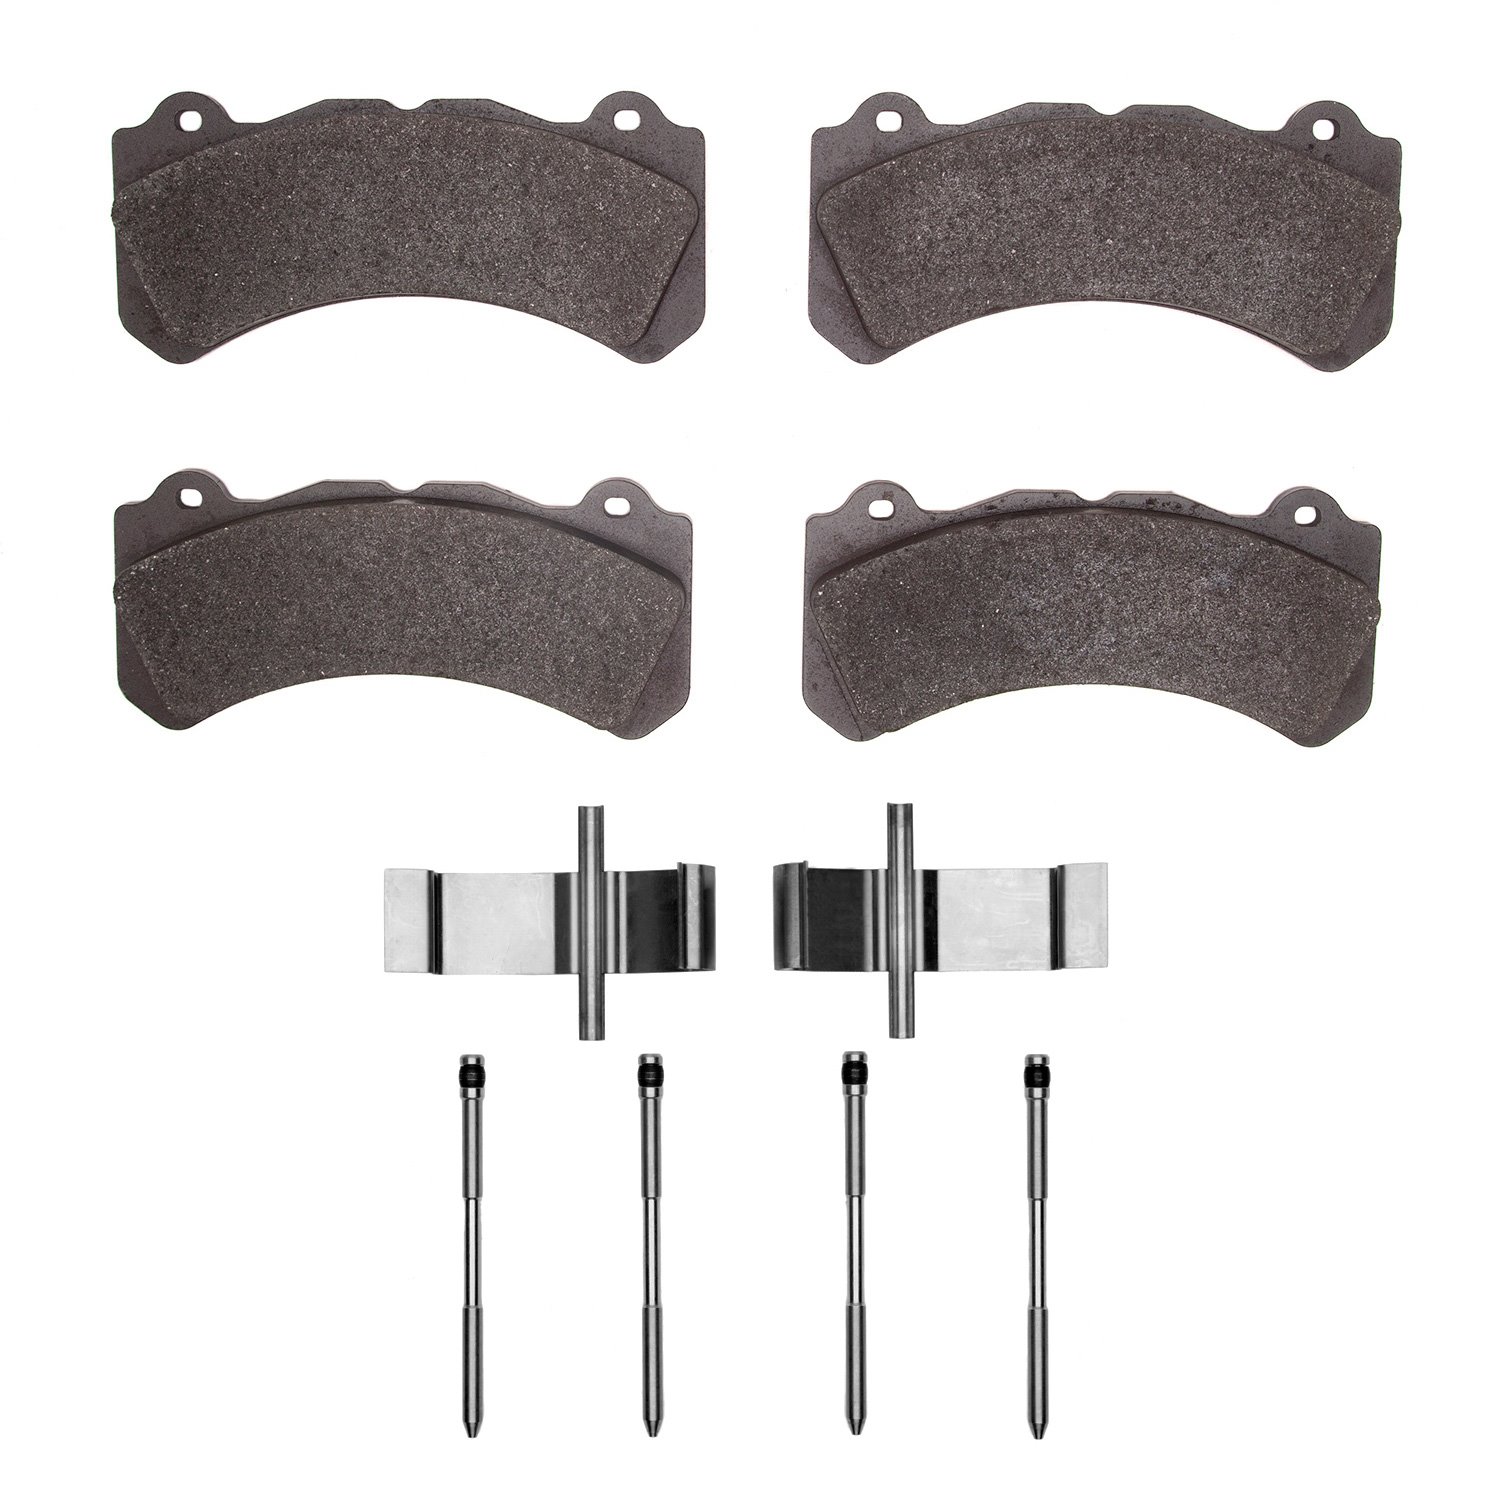 1551-2143-01 5000 Advanced Low-Metallic Brake Pads & Hardware Kit, Fits Select Volvo, Position: Front